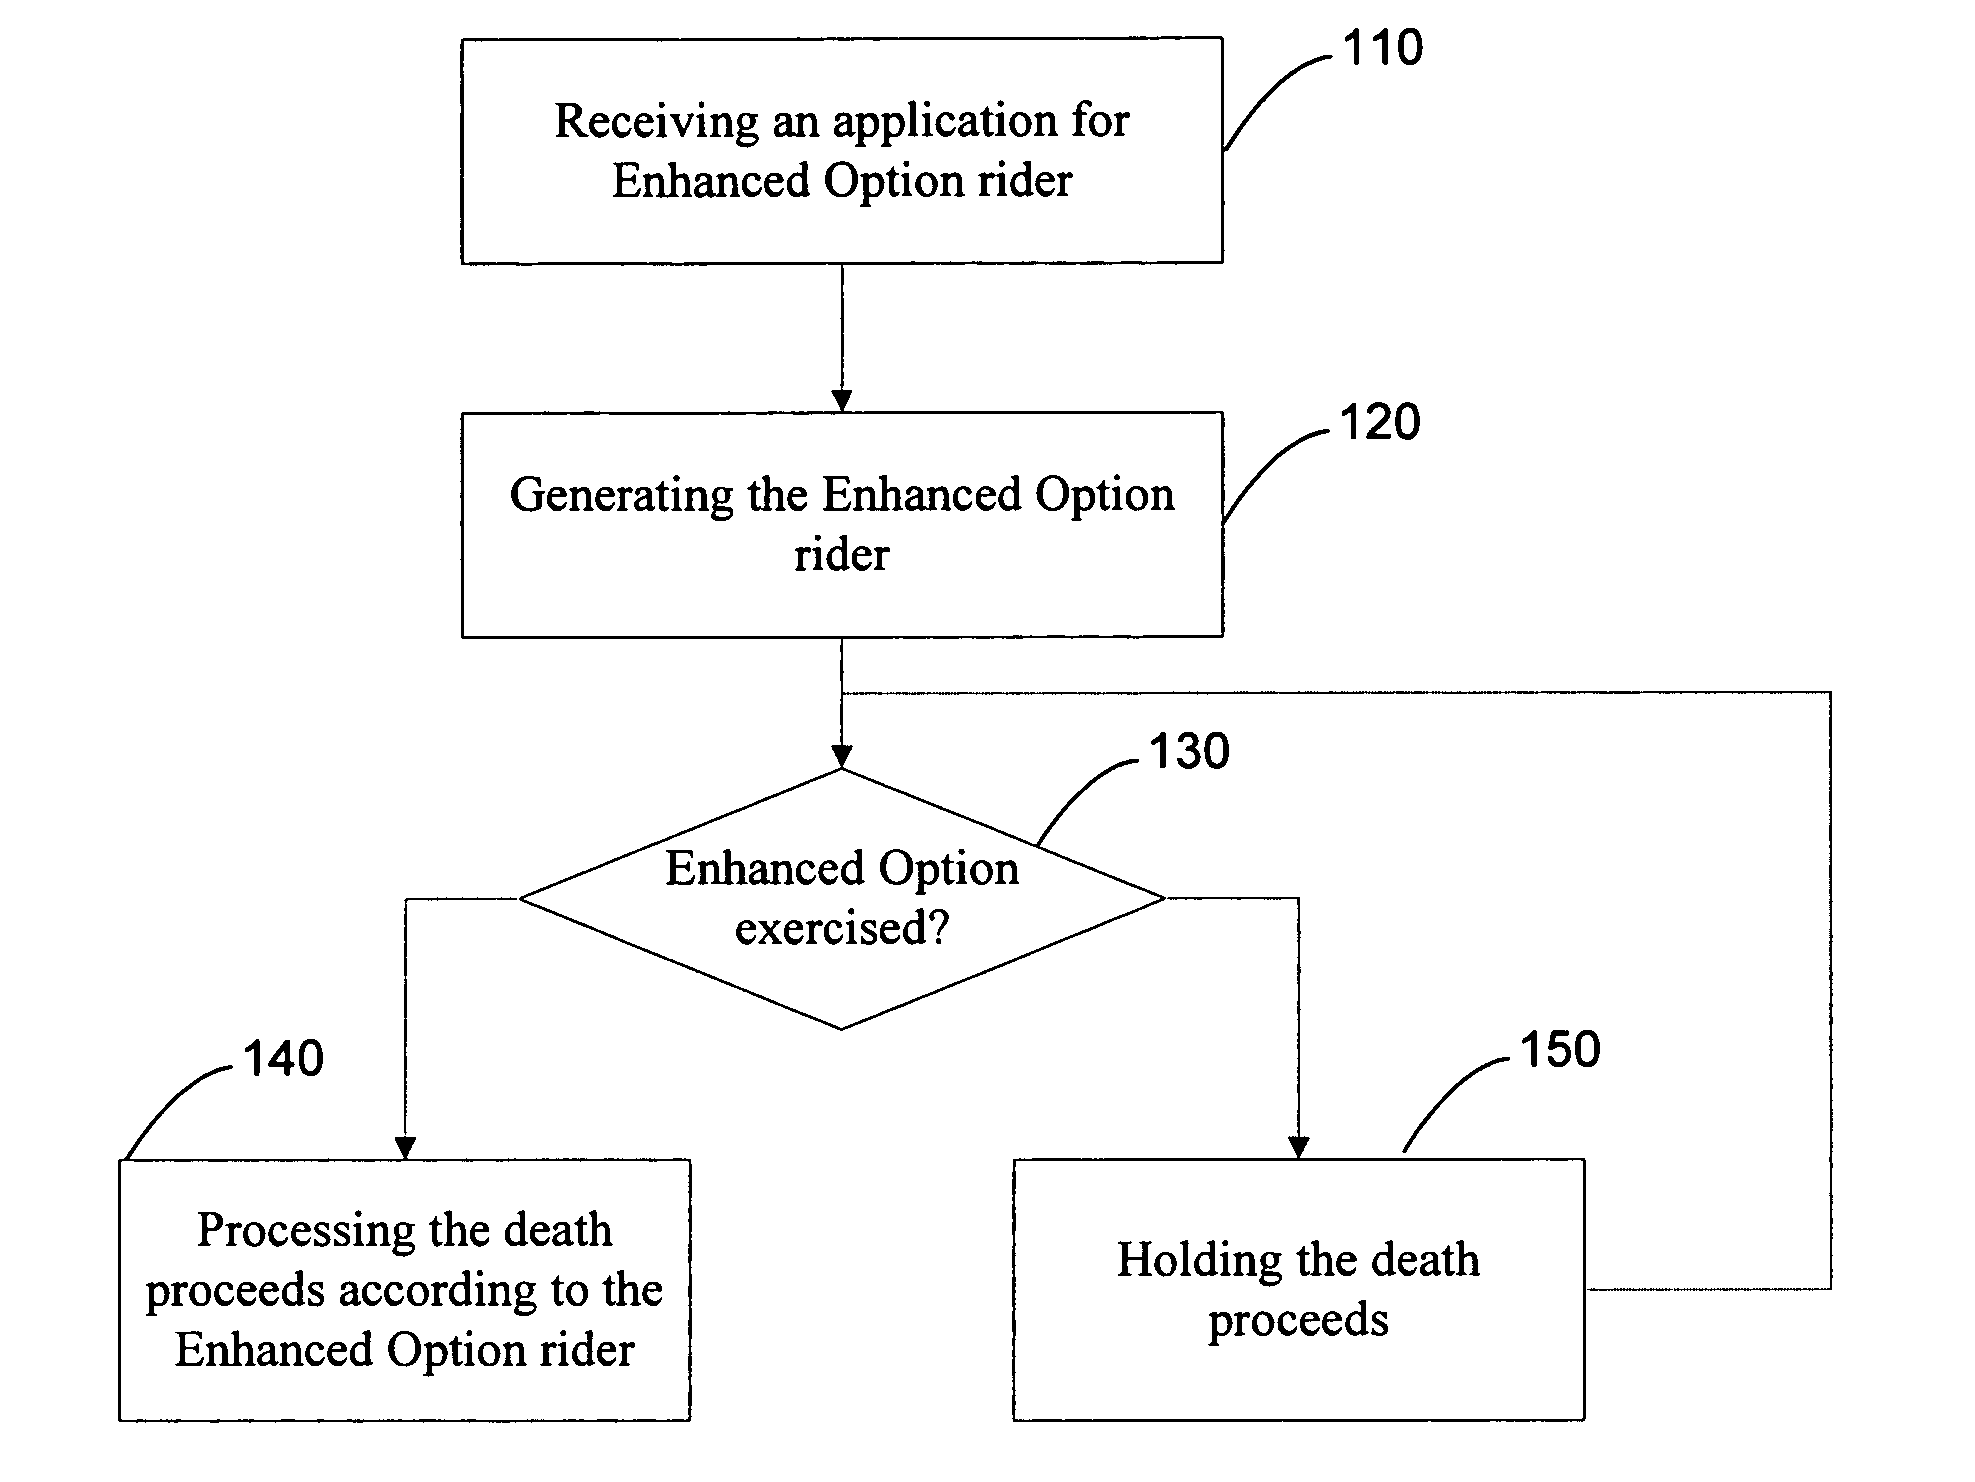 Systems and methods for providing an enhanced option rider to an insurance policy